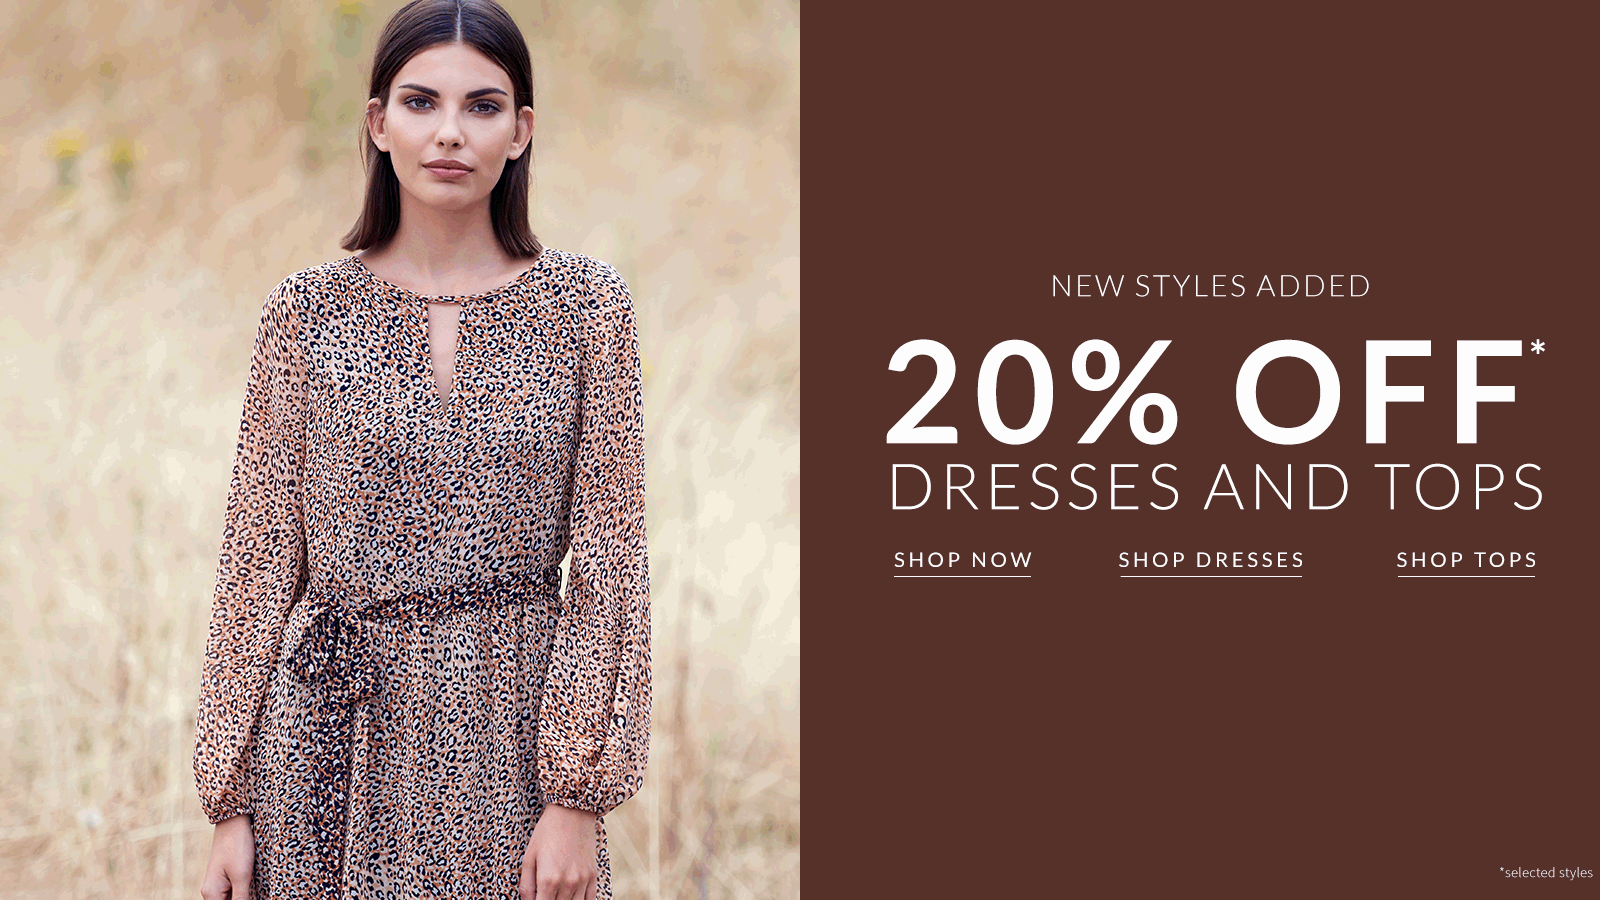 Wallis: 20% off dresses and tops